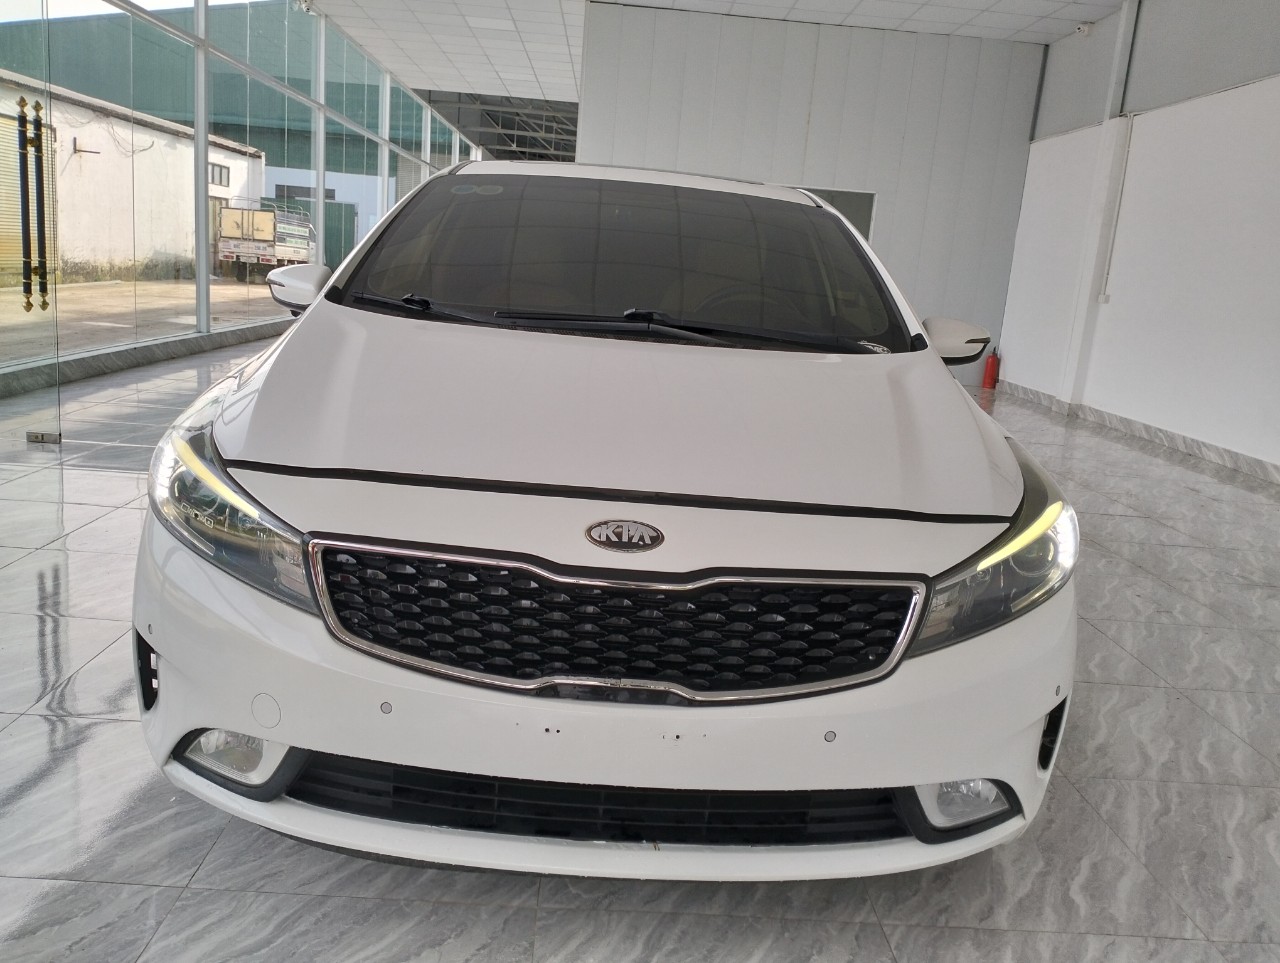 BÁN XE Cerato 1.6 AT sản xuất 2020